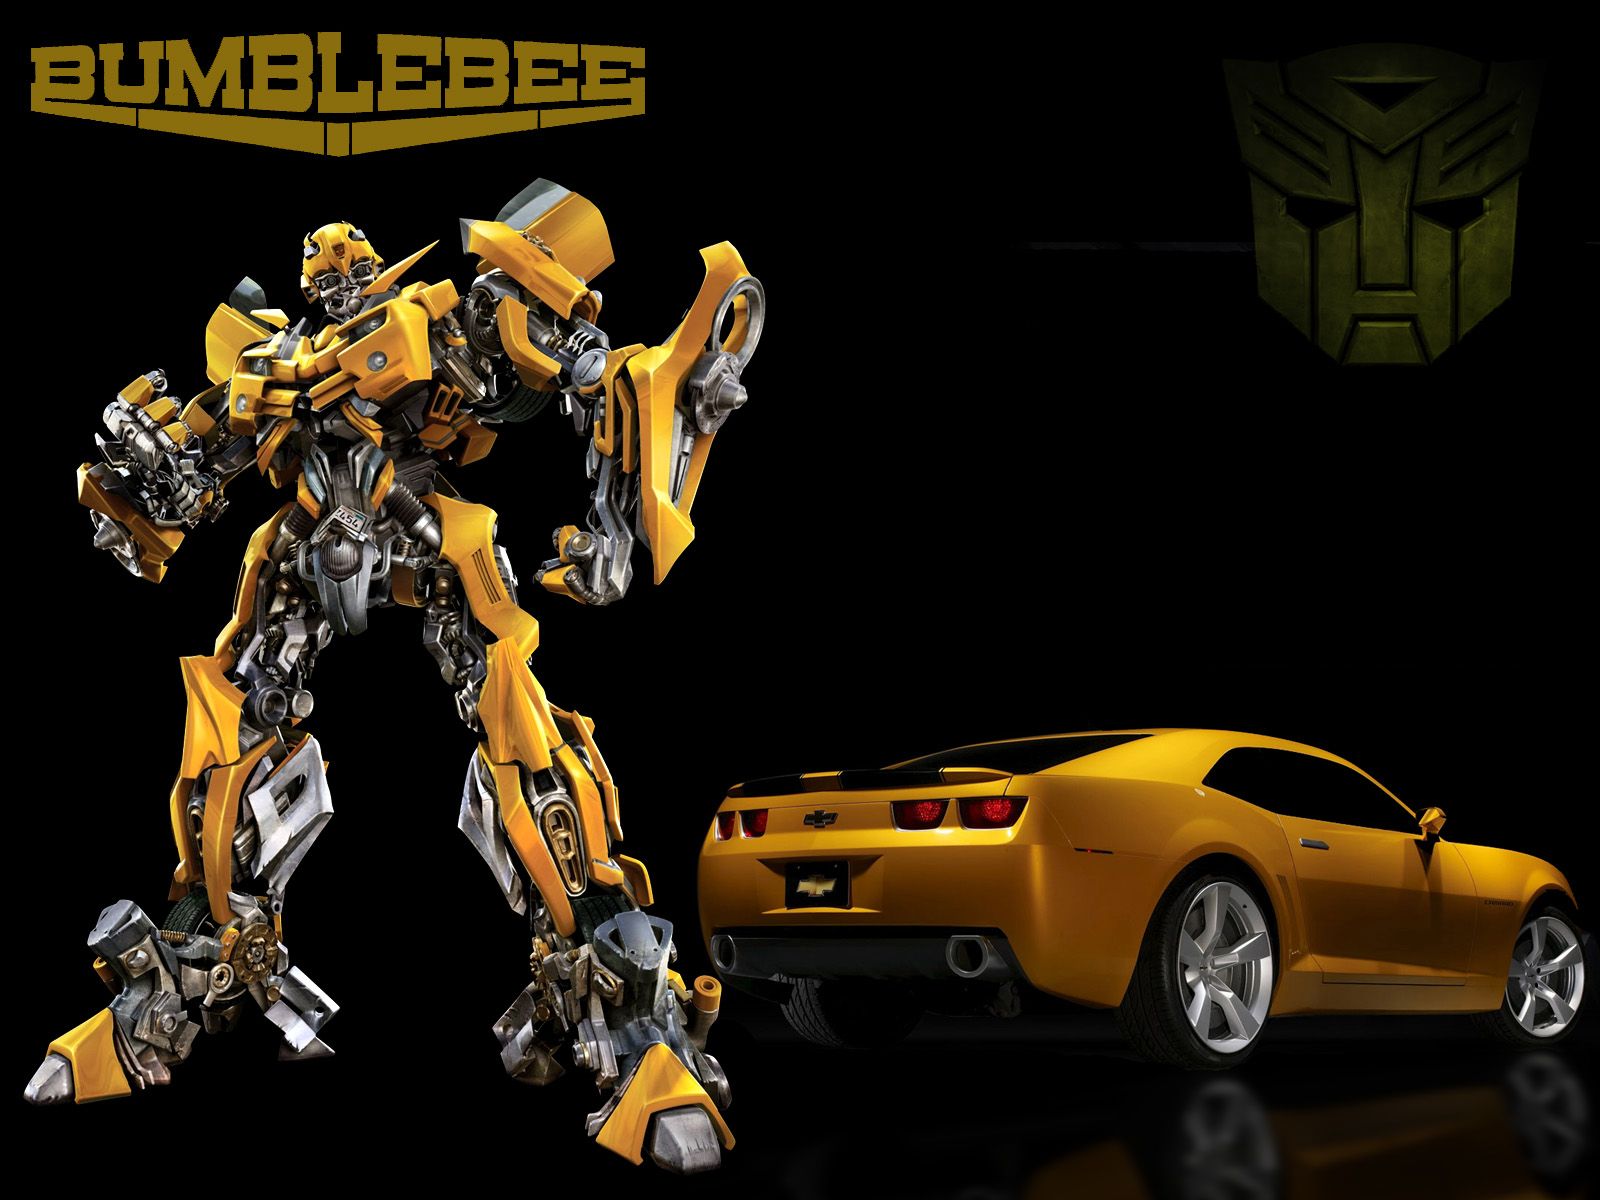 Bumblebee From Transformers Movie wallpaper Its All a Fantasy